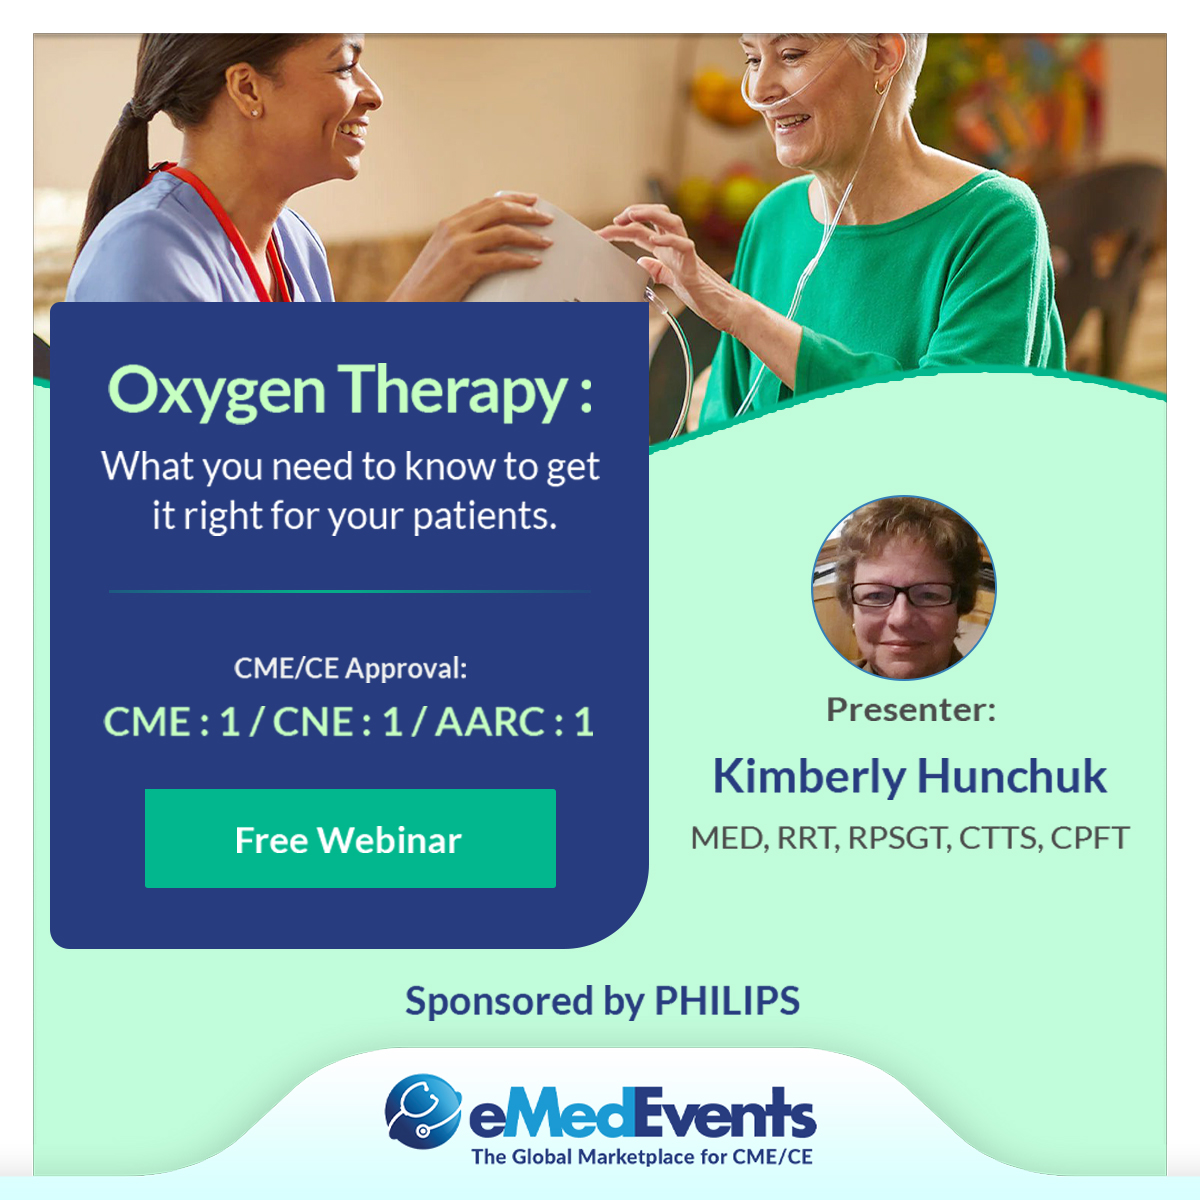 Oxygen Therapy: Expand your knowledge to get it right for your patients.
Checkout Free CE/CME from @Philips 
bit.ly/3E5n6OI

#eMedEvents #oxygentherapy #patients #freewebinar #CME #CE #CNE #AARC #medicaleducation #Physicians #Nurses #Dentists #Pharmacists